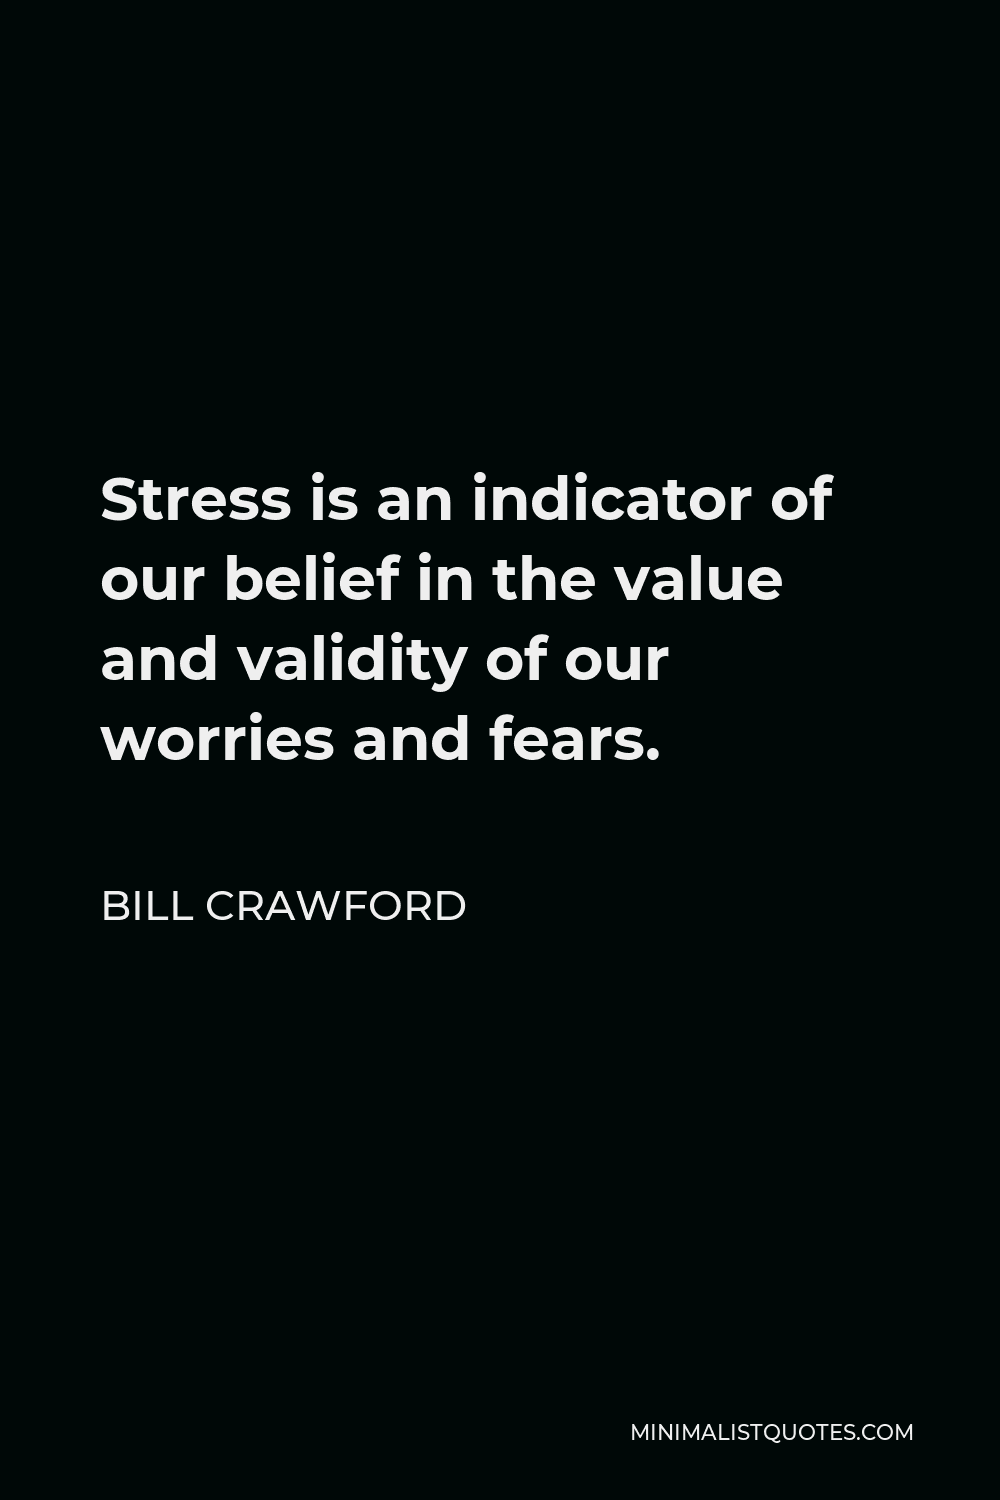 Bill Crawford Quote - Stress is an indicator of our belief in the value and validity of our worries and fears.